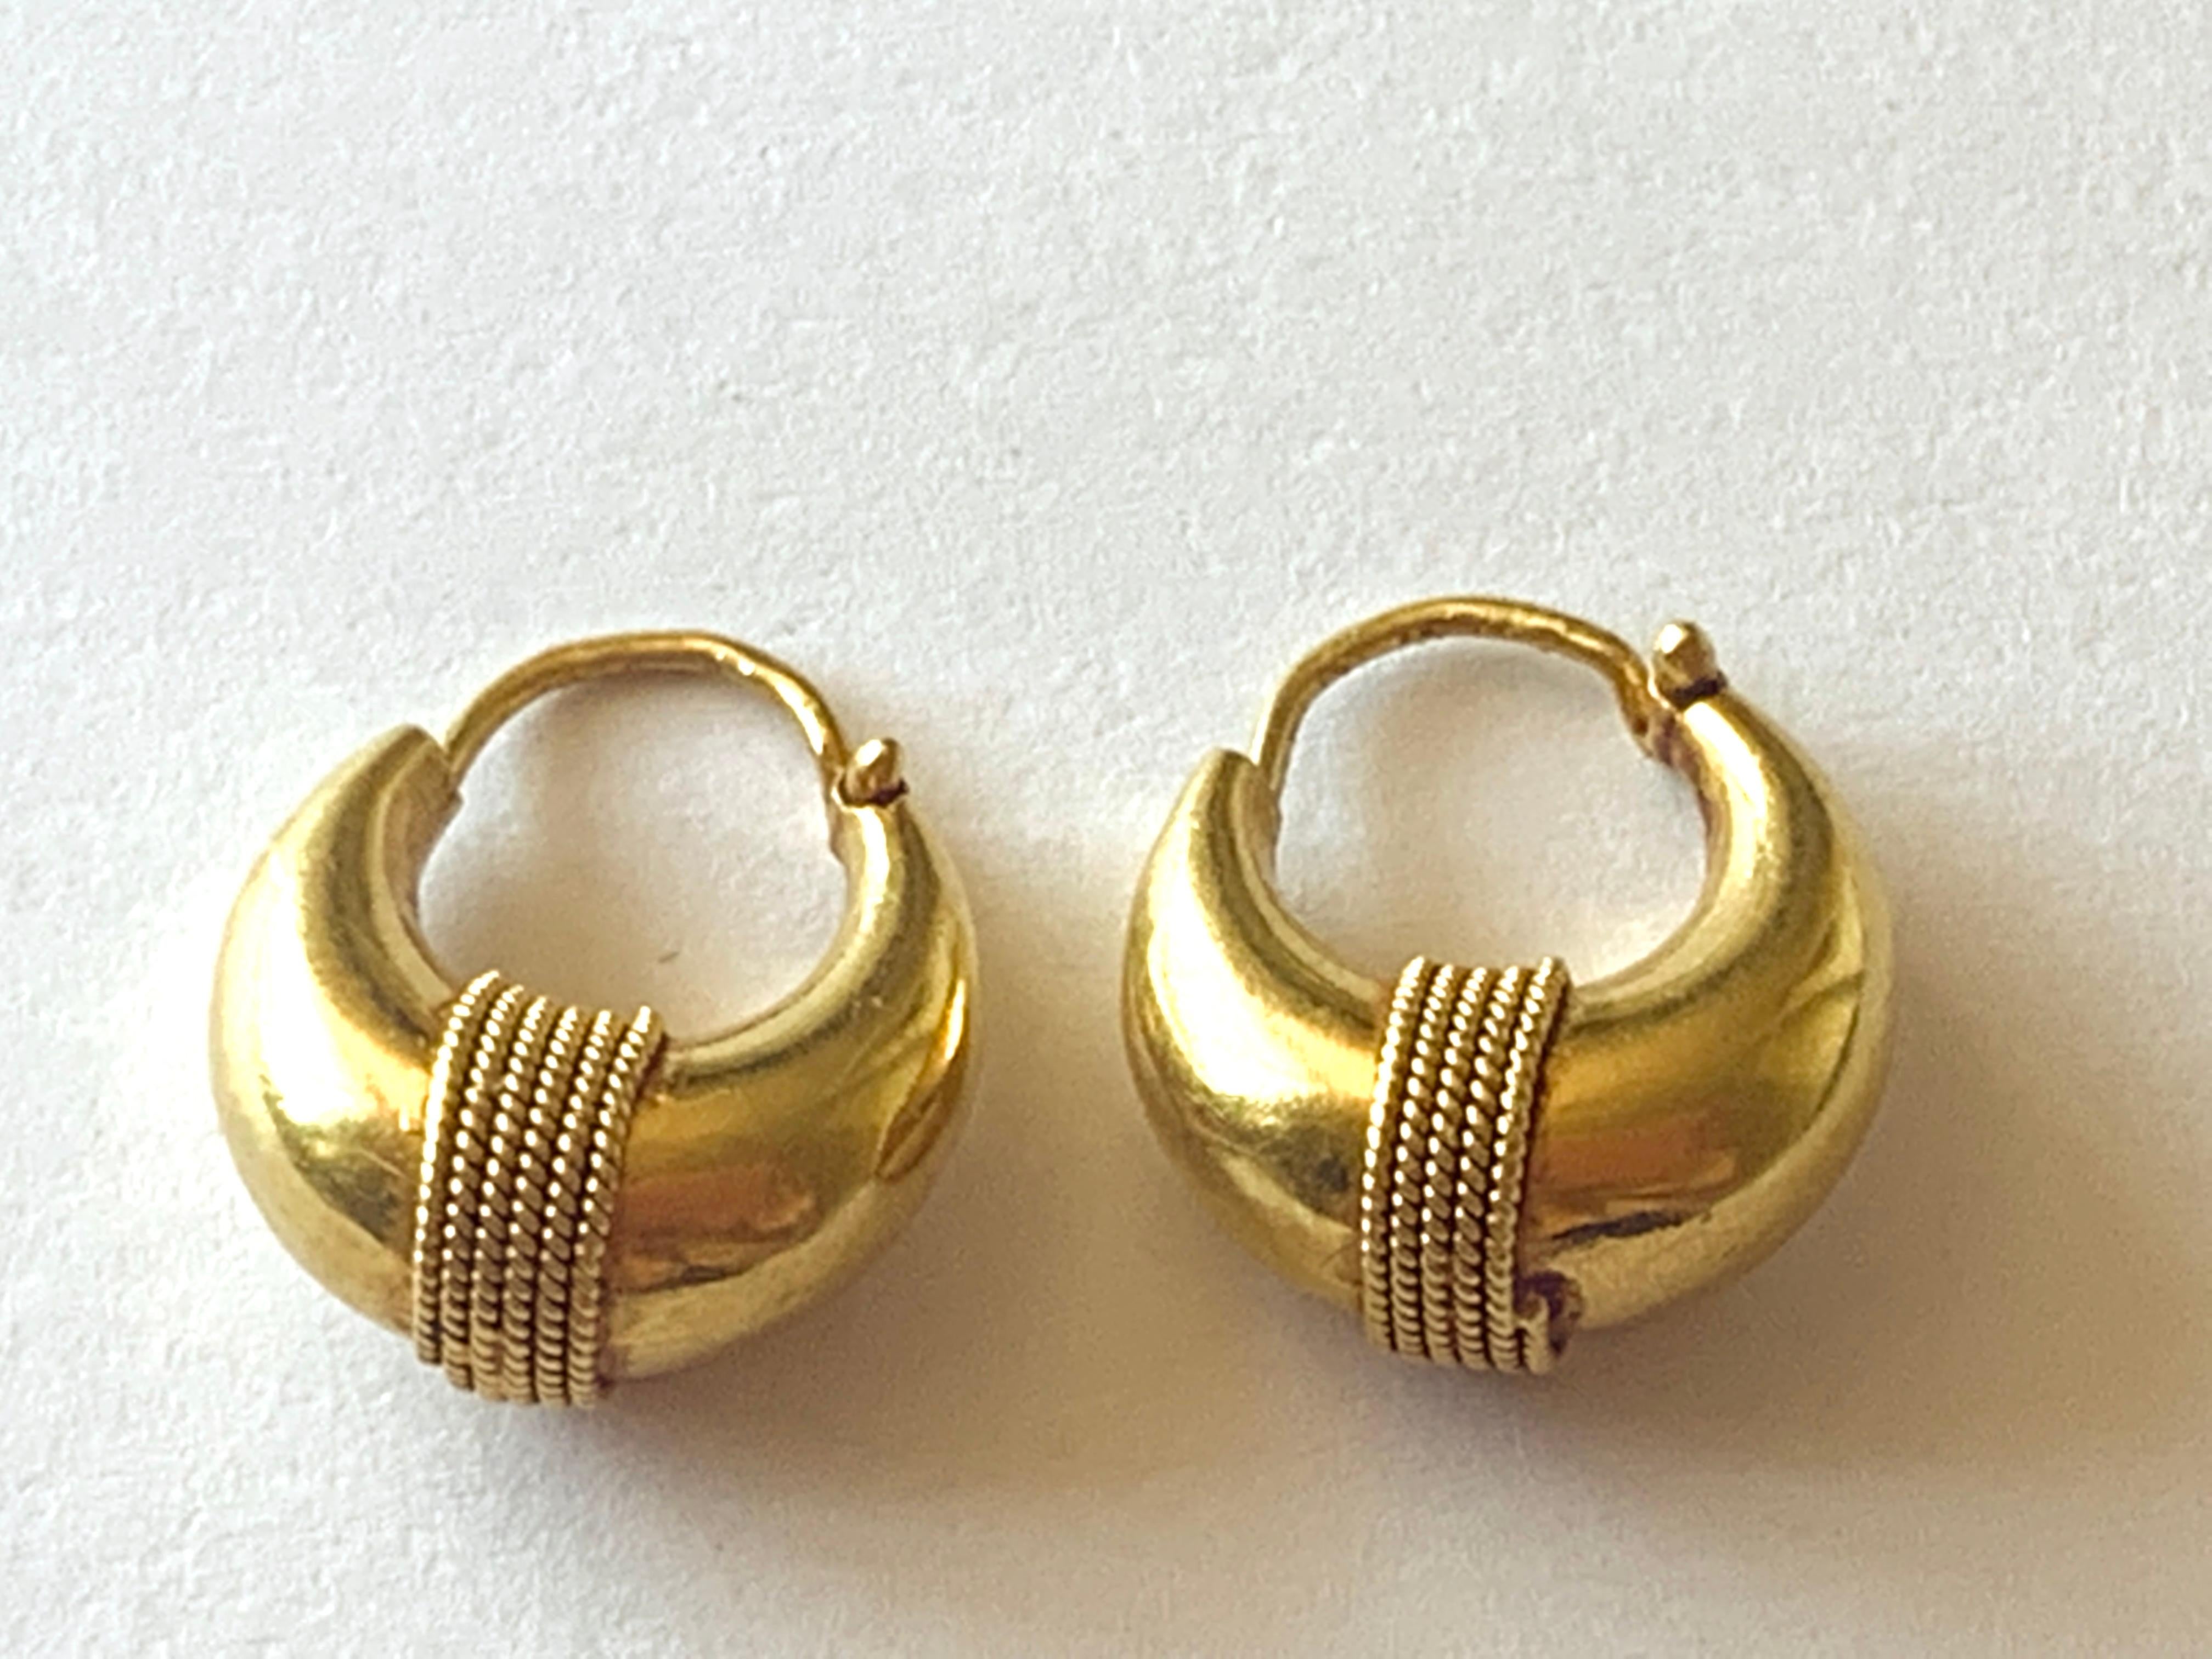 Rare Vintage 18ct Gold Handmade Roman Design Creoles
with beautiful boat shaped adorned with a flowing rope design - 
Hallmarked in the U.K For 18ct Gold 
possibly slightly higher as united kingdom only stamps for 18ct and 22ct 
Import Date letter X